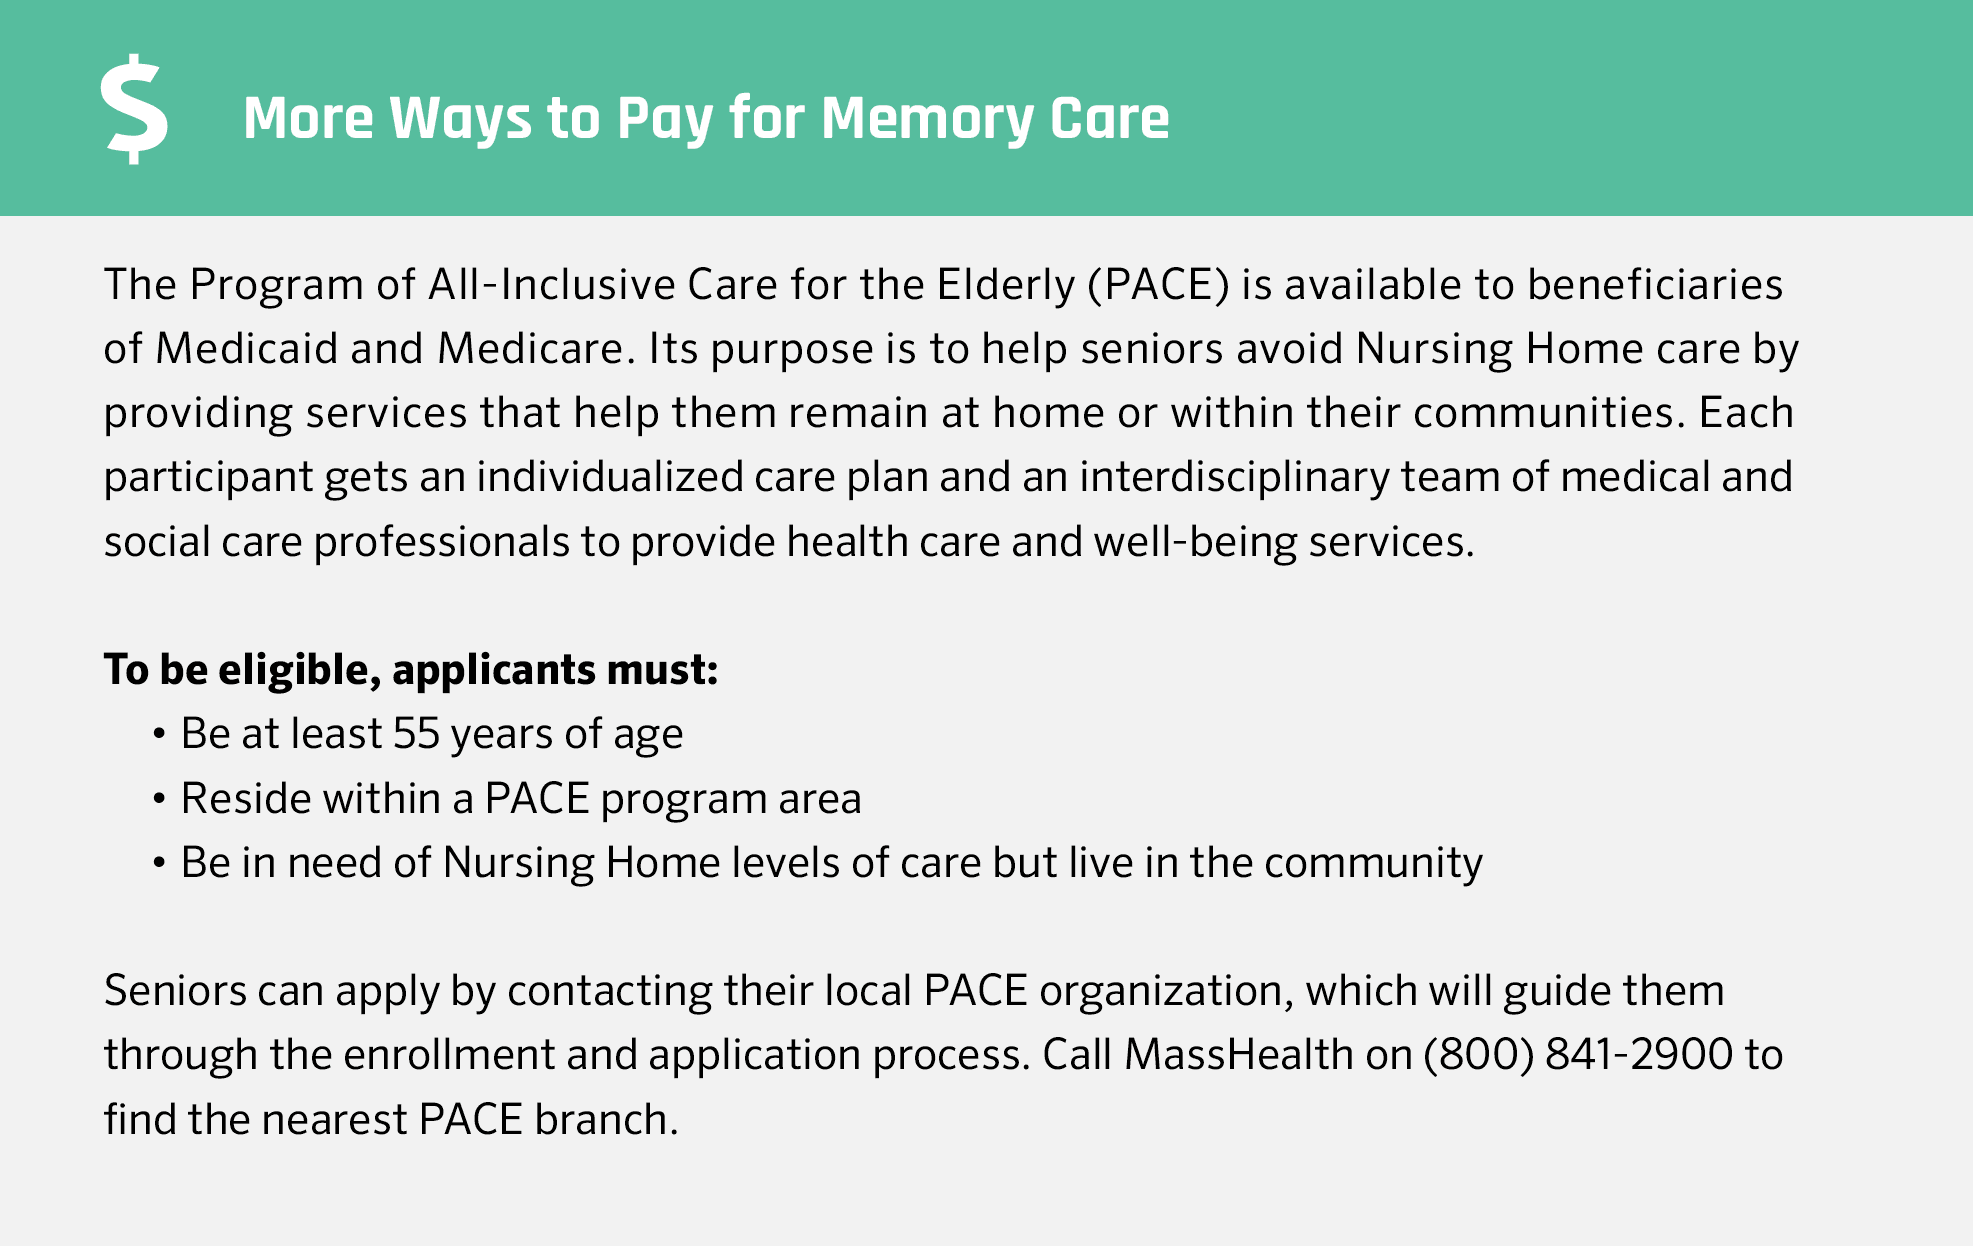 Financial Assistance for Memory Care in Maryland